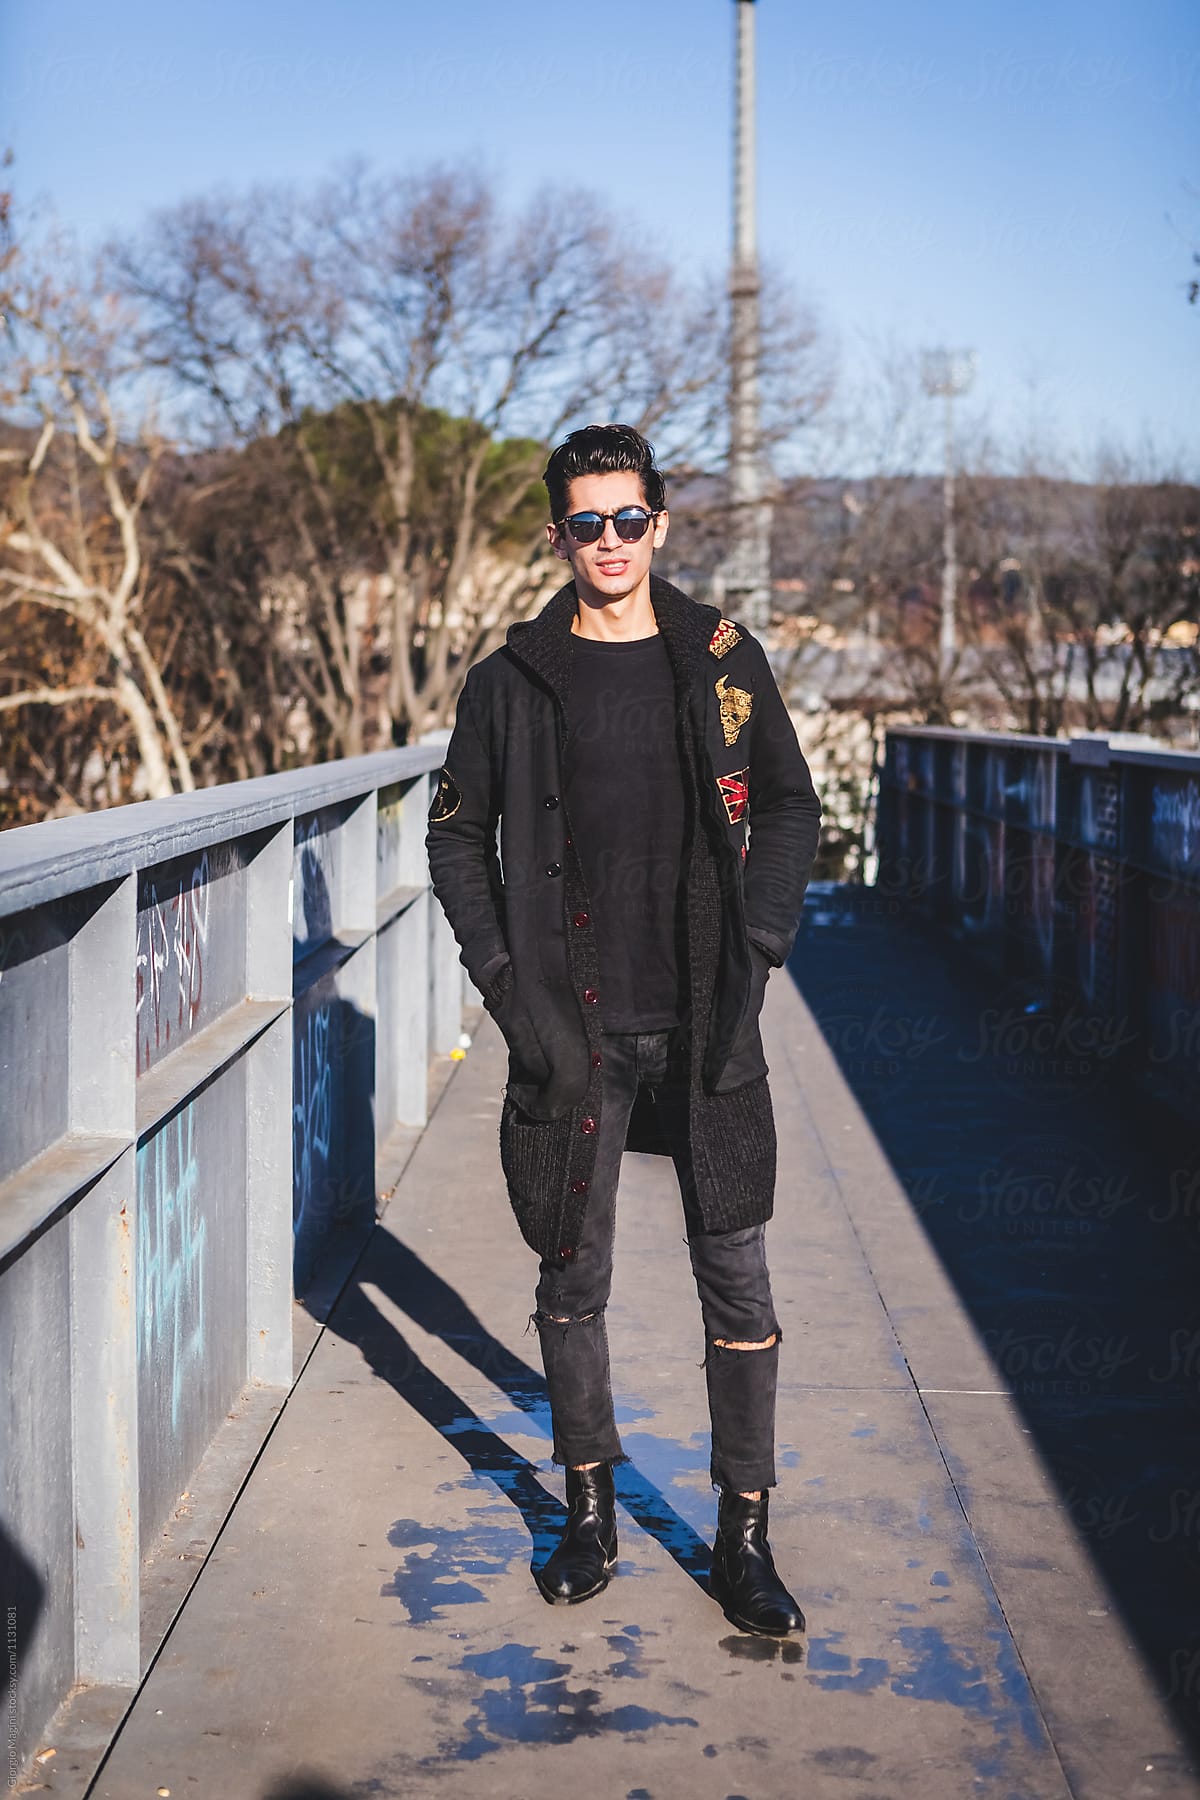 Young Man Dressed in Black Posing Tough in Urban Area